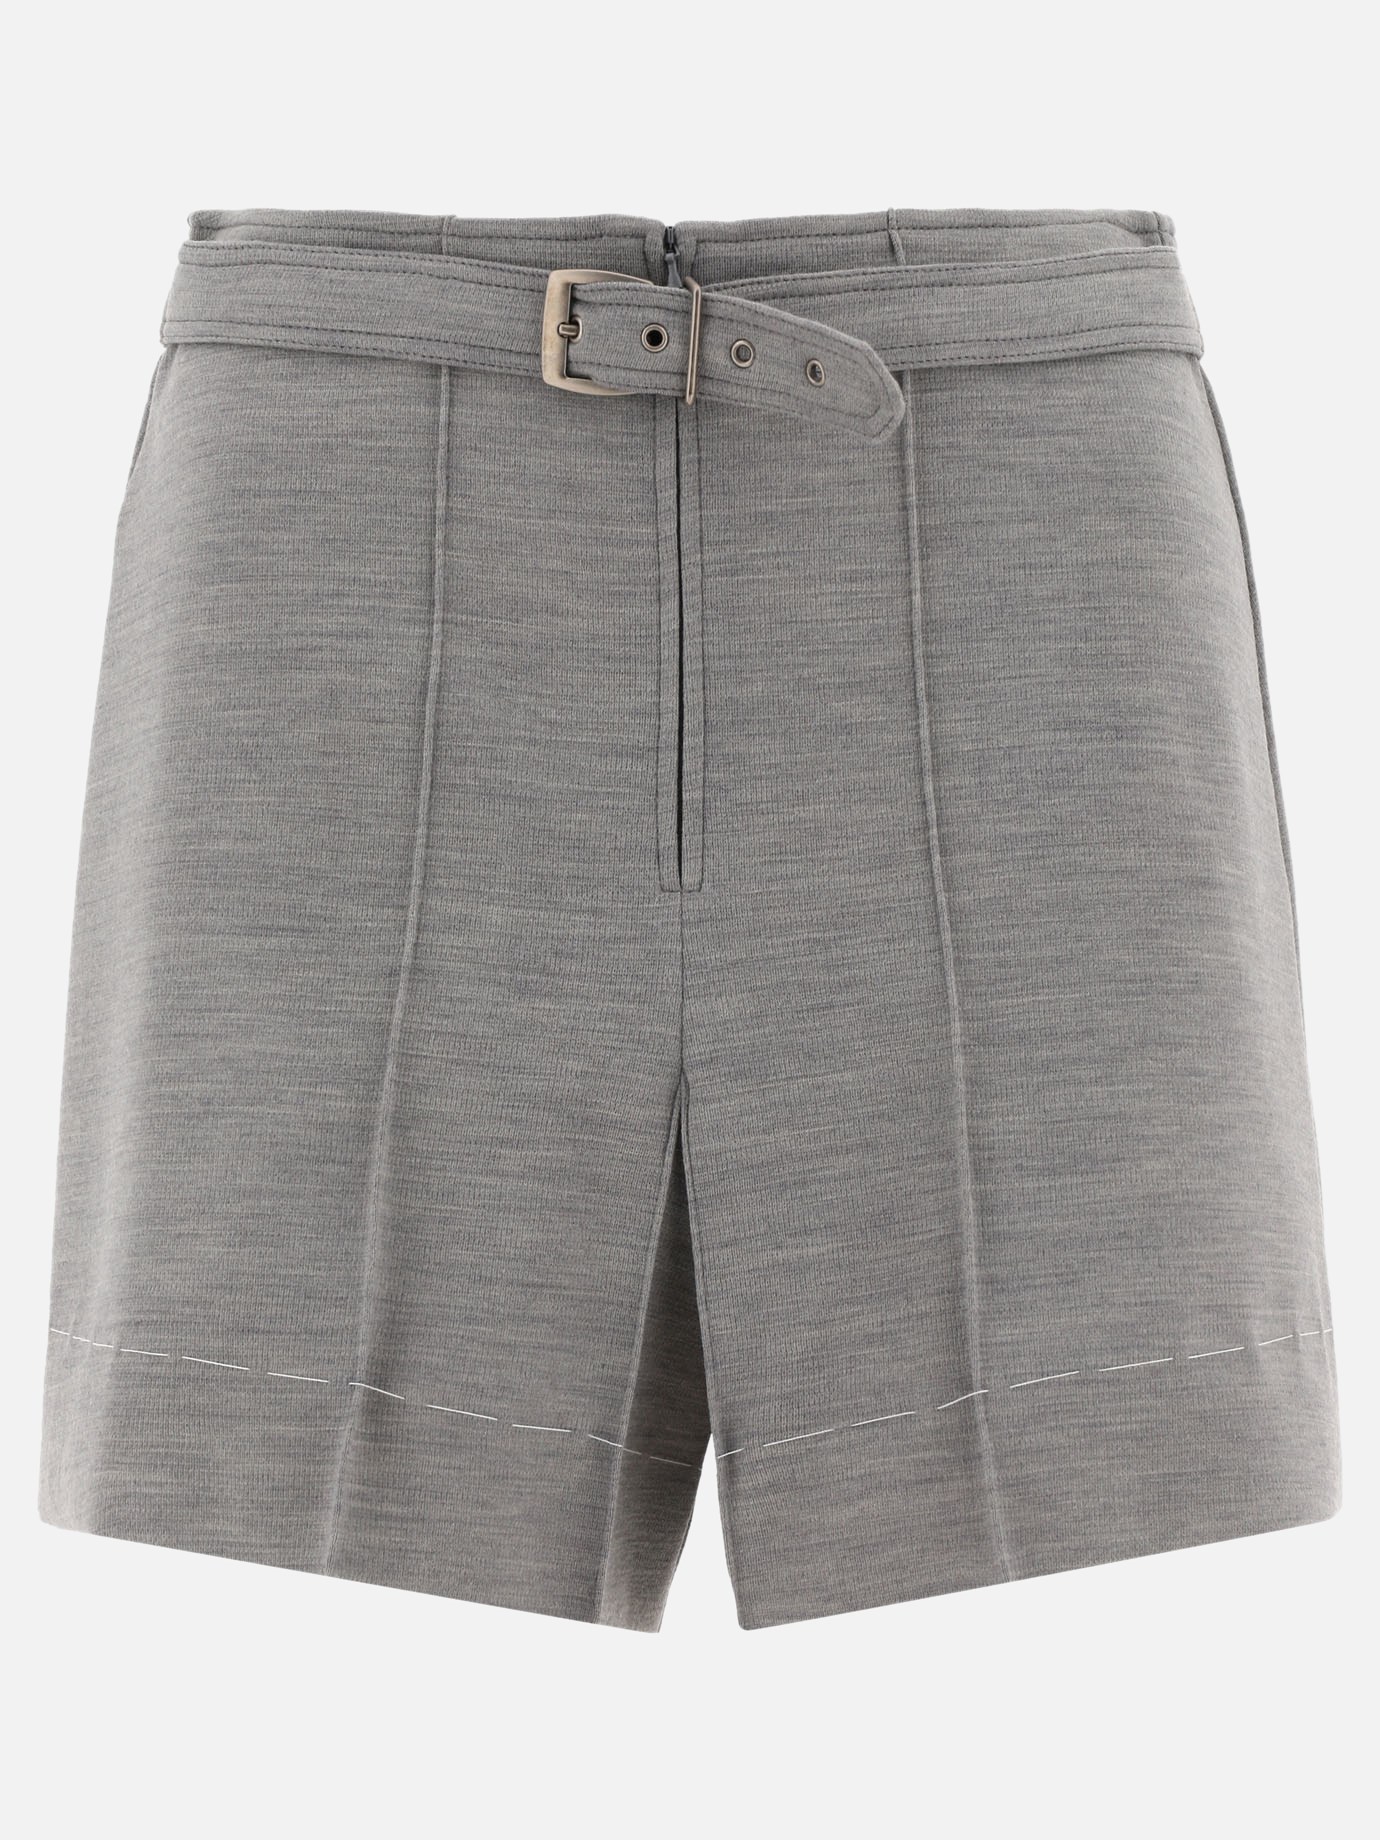 Tailored shorts with beltby Maison Margiela - 4